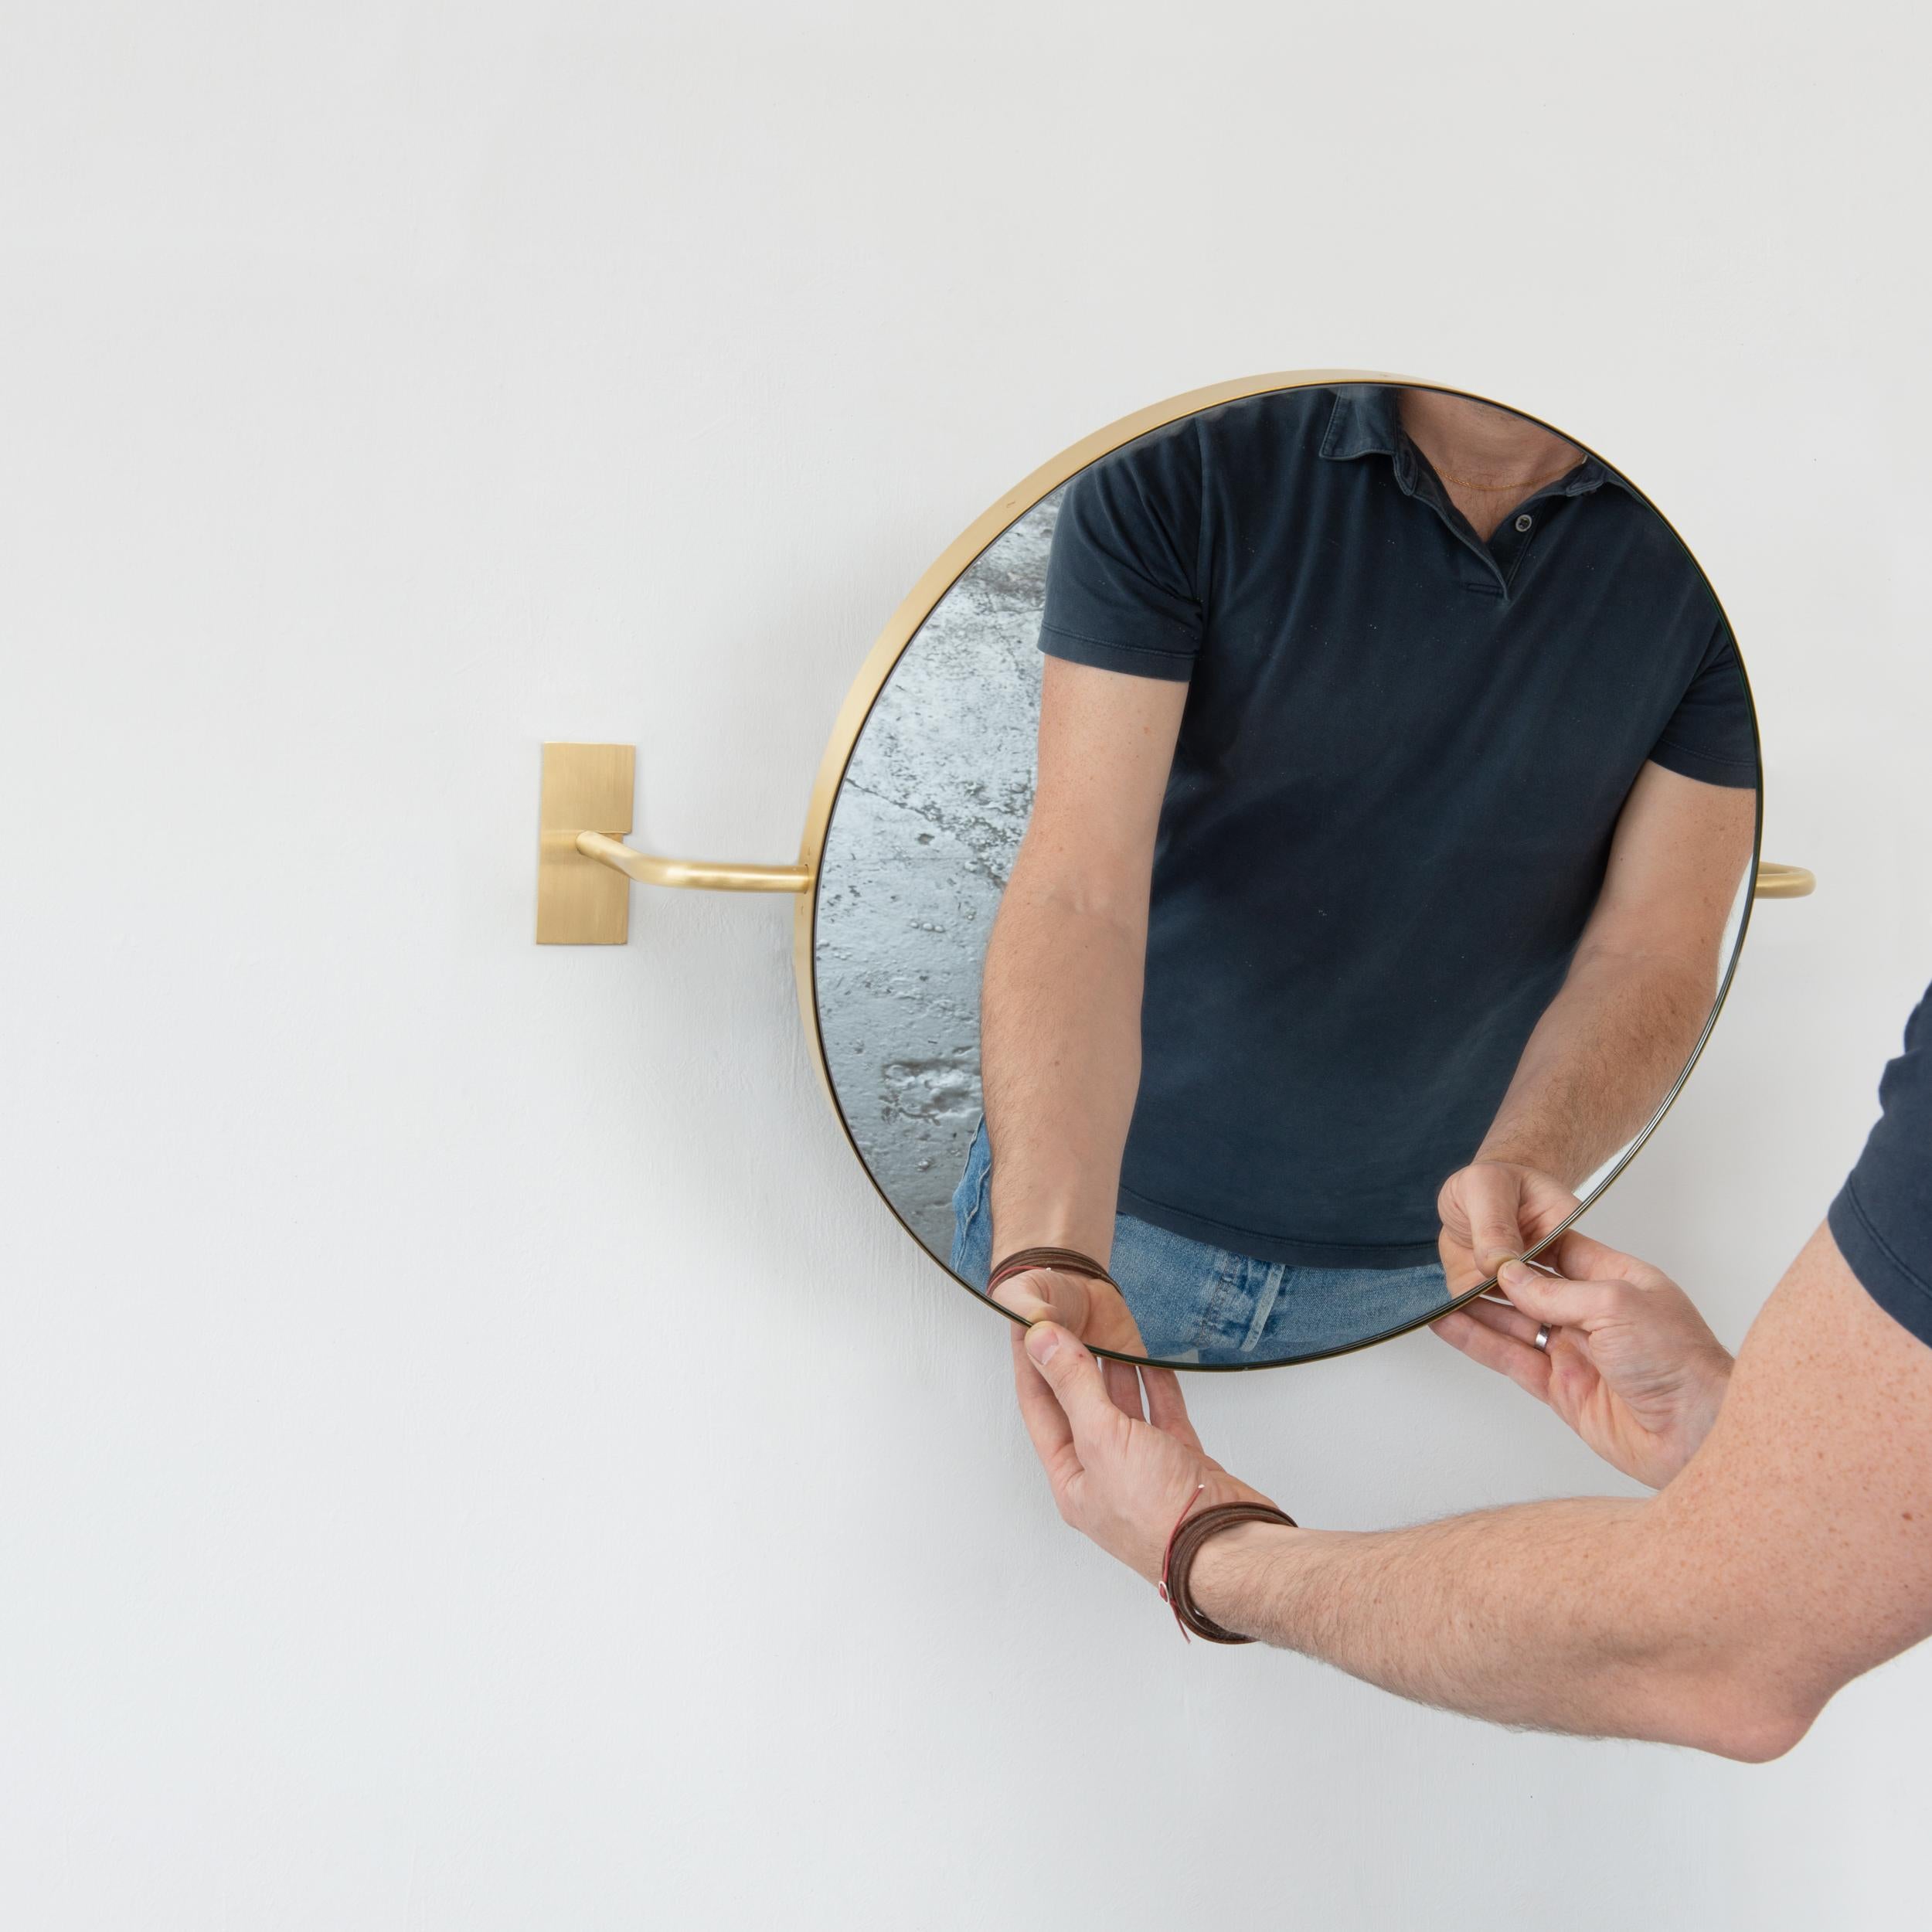 Designed and handcrafted in London, UK, our brand new Vorso™ mirror is an ingenious, original and elegant addition to our flexible range of wall hanging, ceiling suspended and wall leaning mirror solutions.

The two arms are designed to fix the